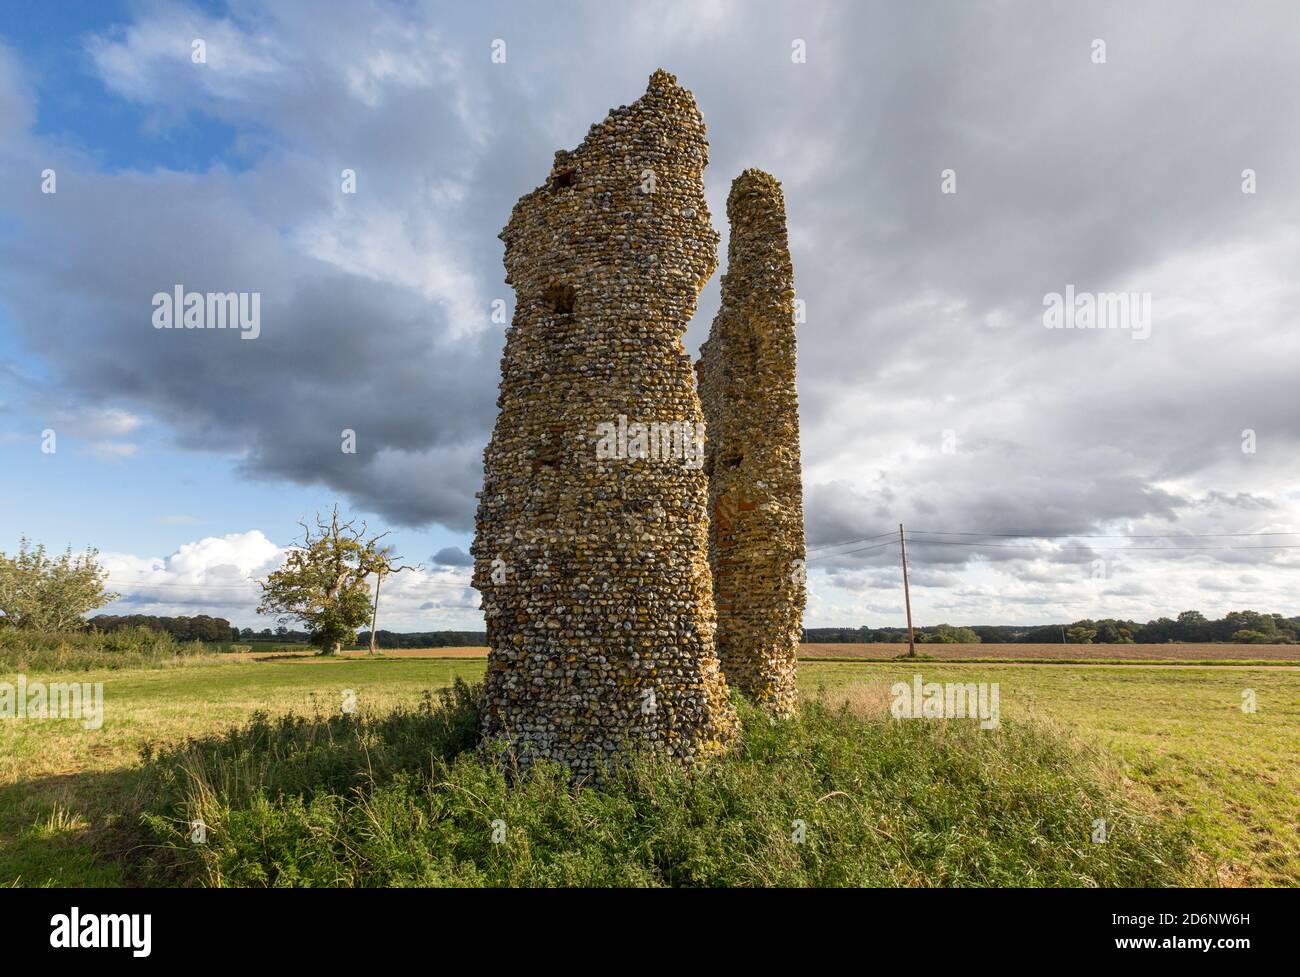 Remains of the 12th century round tower of the Church of St Mary, Thorpe Parva, near Diss, South Norfolk, England, UK. The church demolished in 1540. Stock Photo